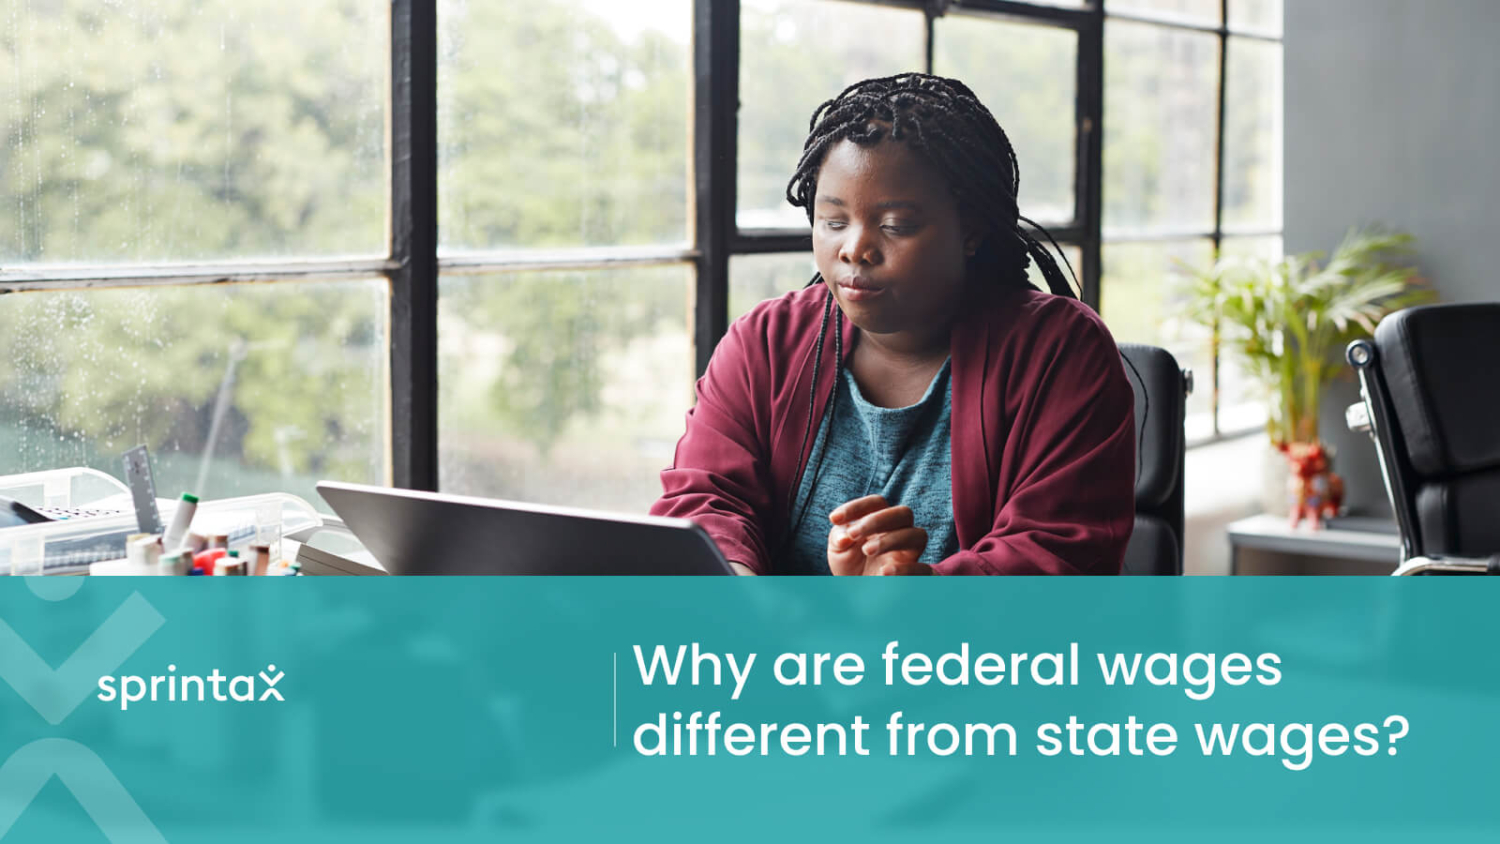 Federal wages differing from state wages